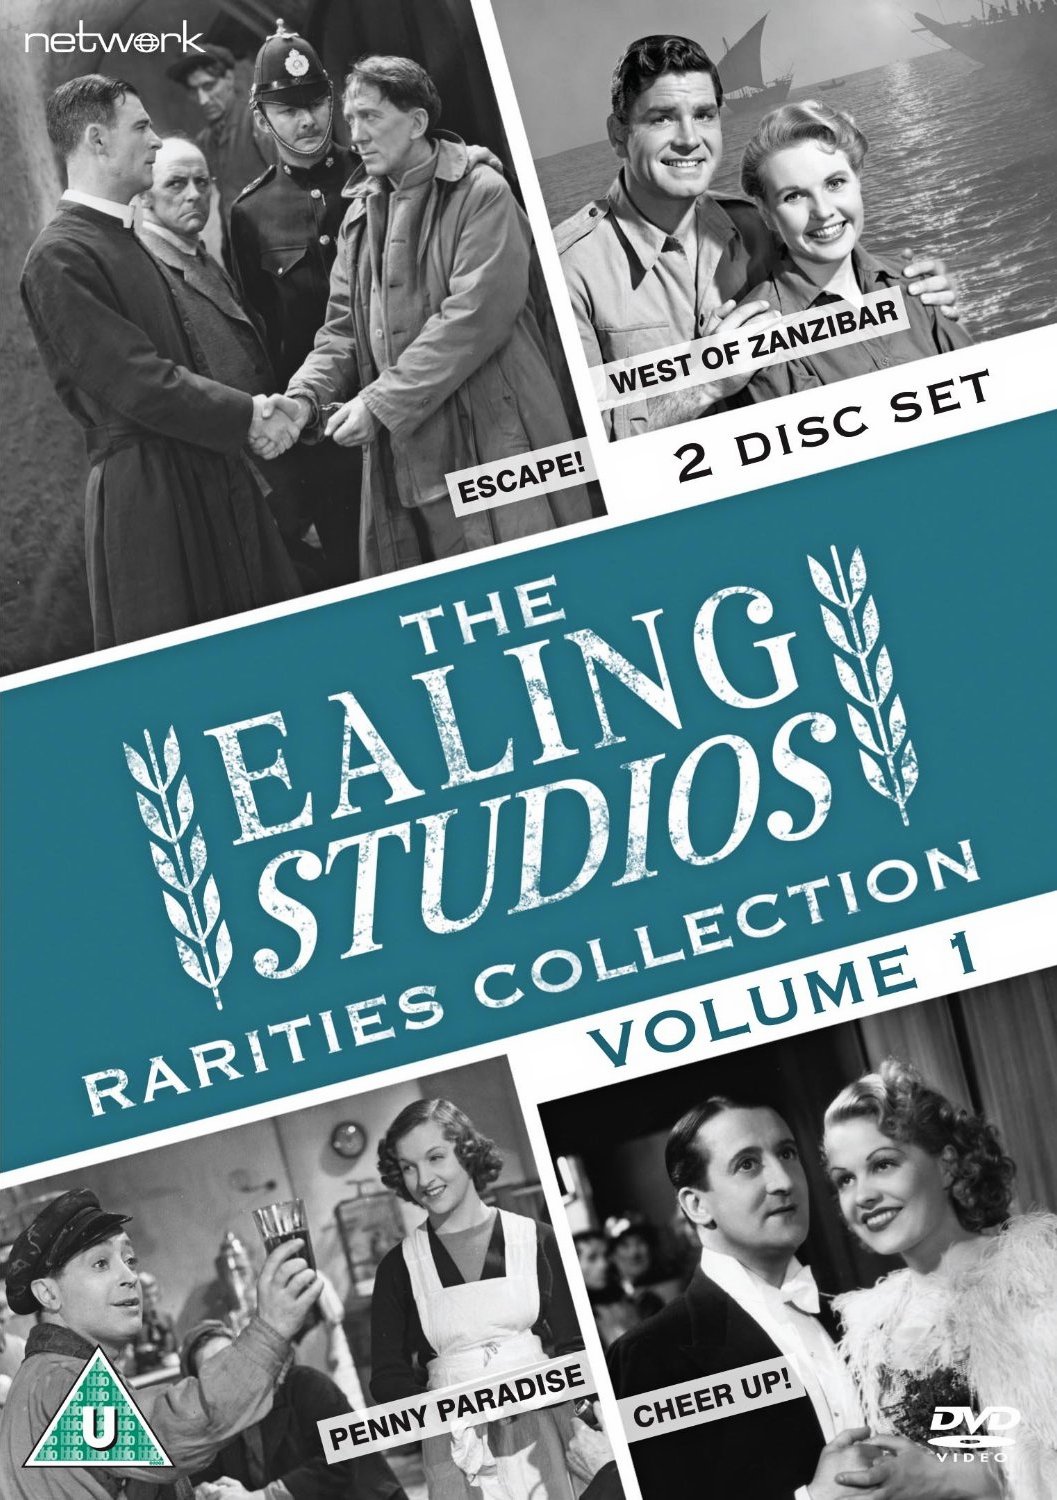 The Ealing Studios Rarities Collection DVD – Volume 1 from Network as part of the British Film collection. Features Escape!, West of Zanzibar, Penny Paradise, Cheer Up!